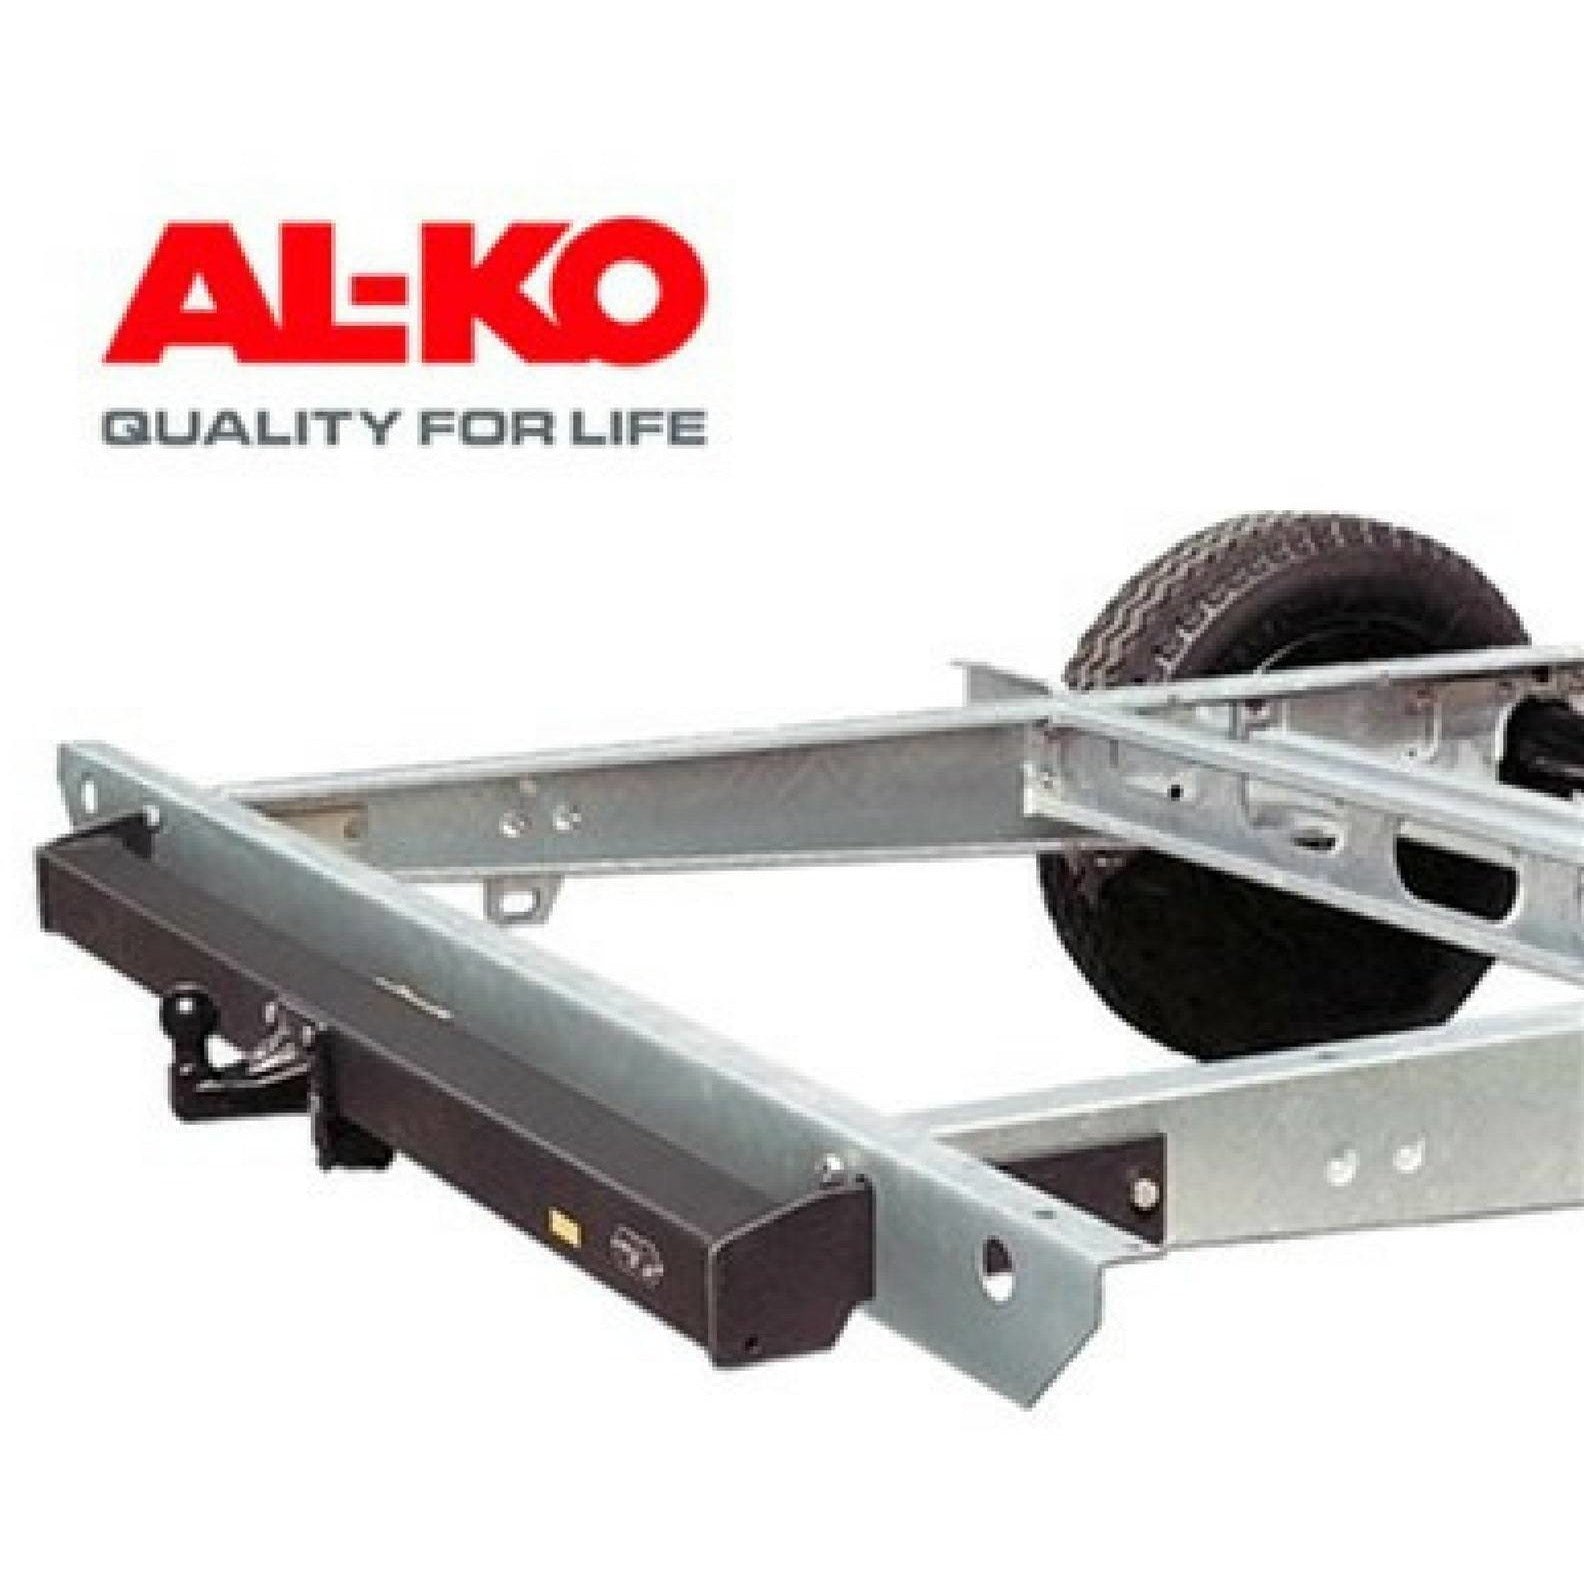 ALKO Towbar Assembly (1202291) made by ALKO. A Towing sold by Quality Caravan Awnings